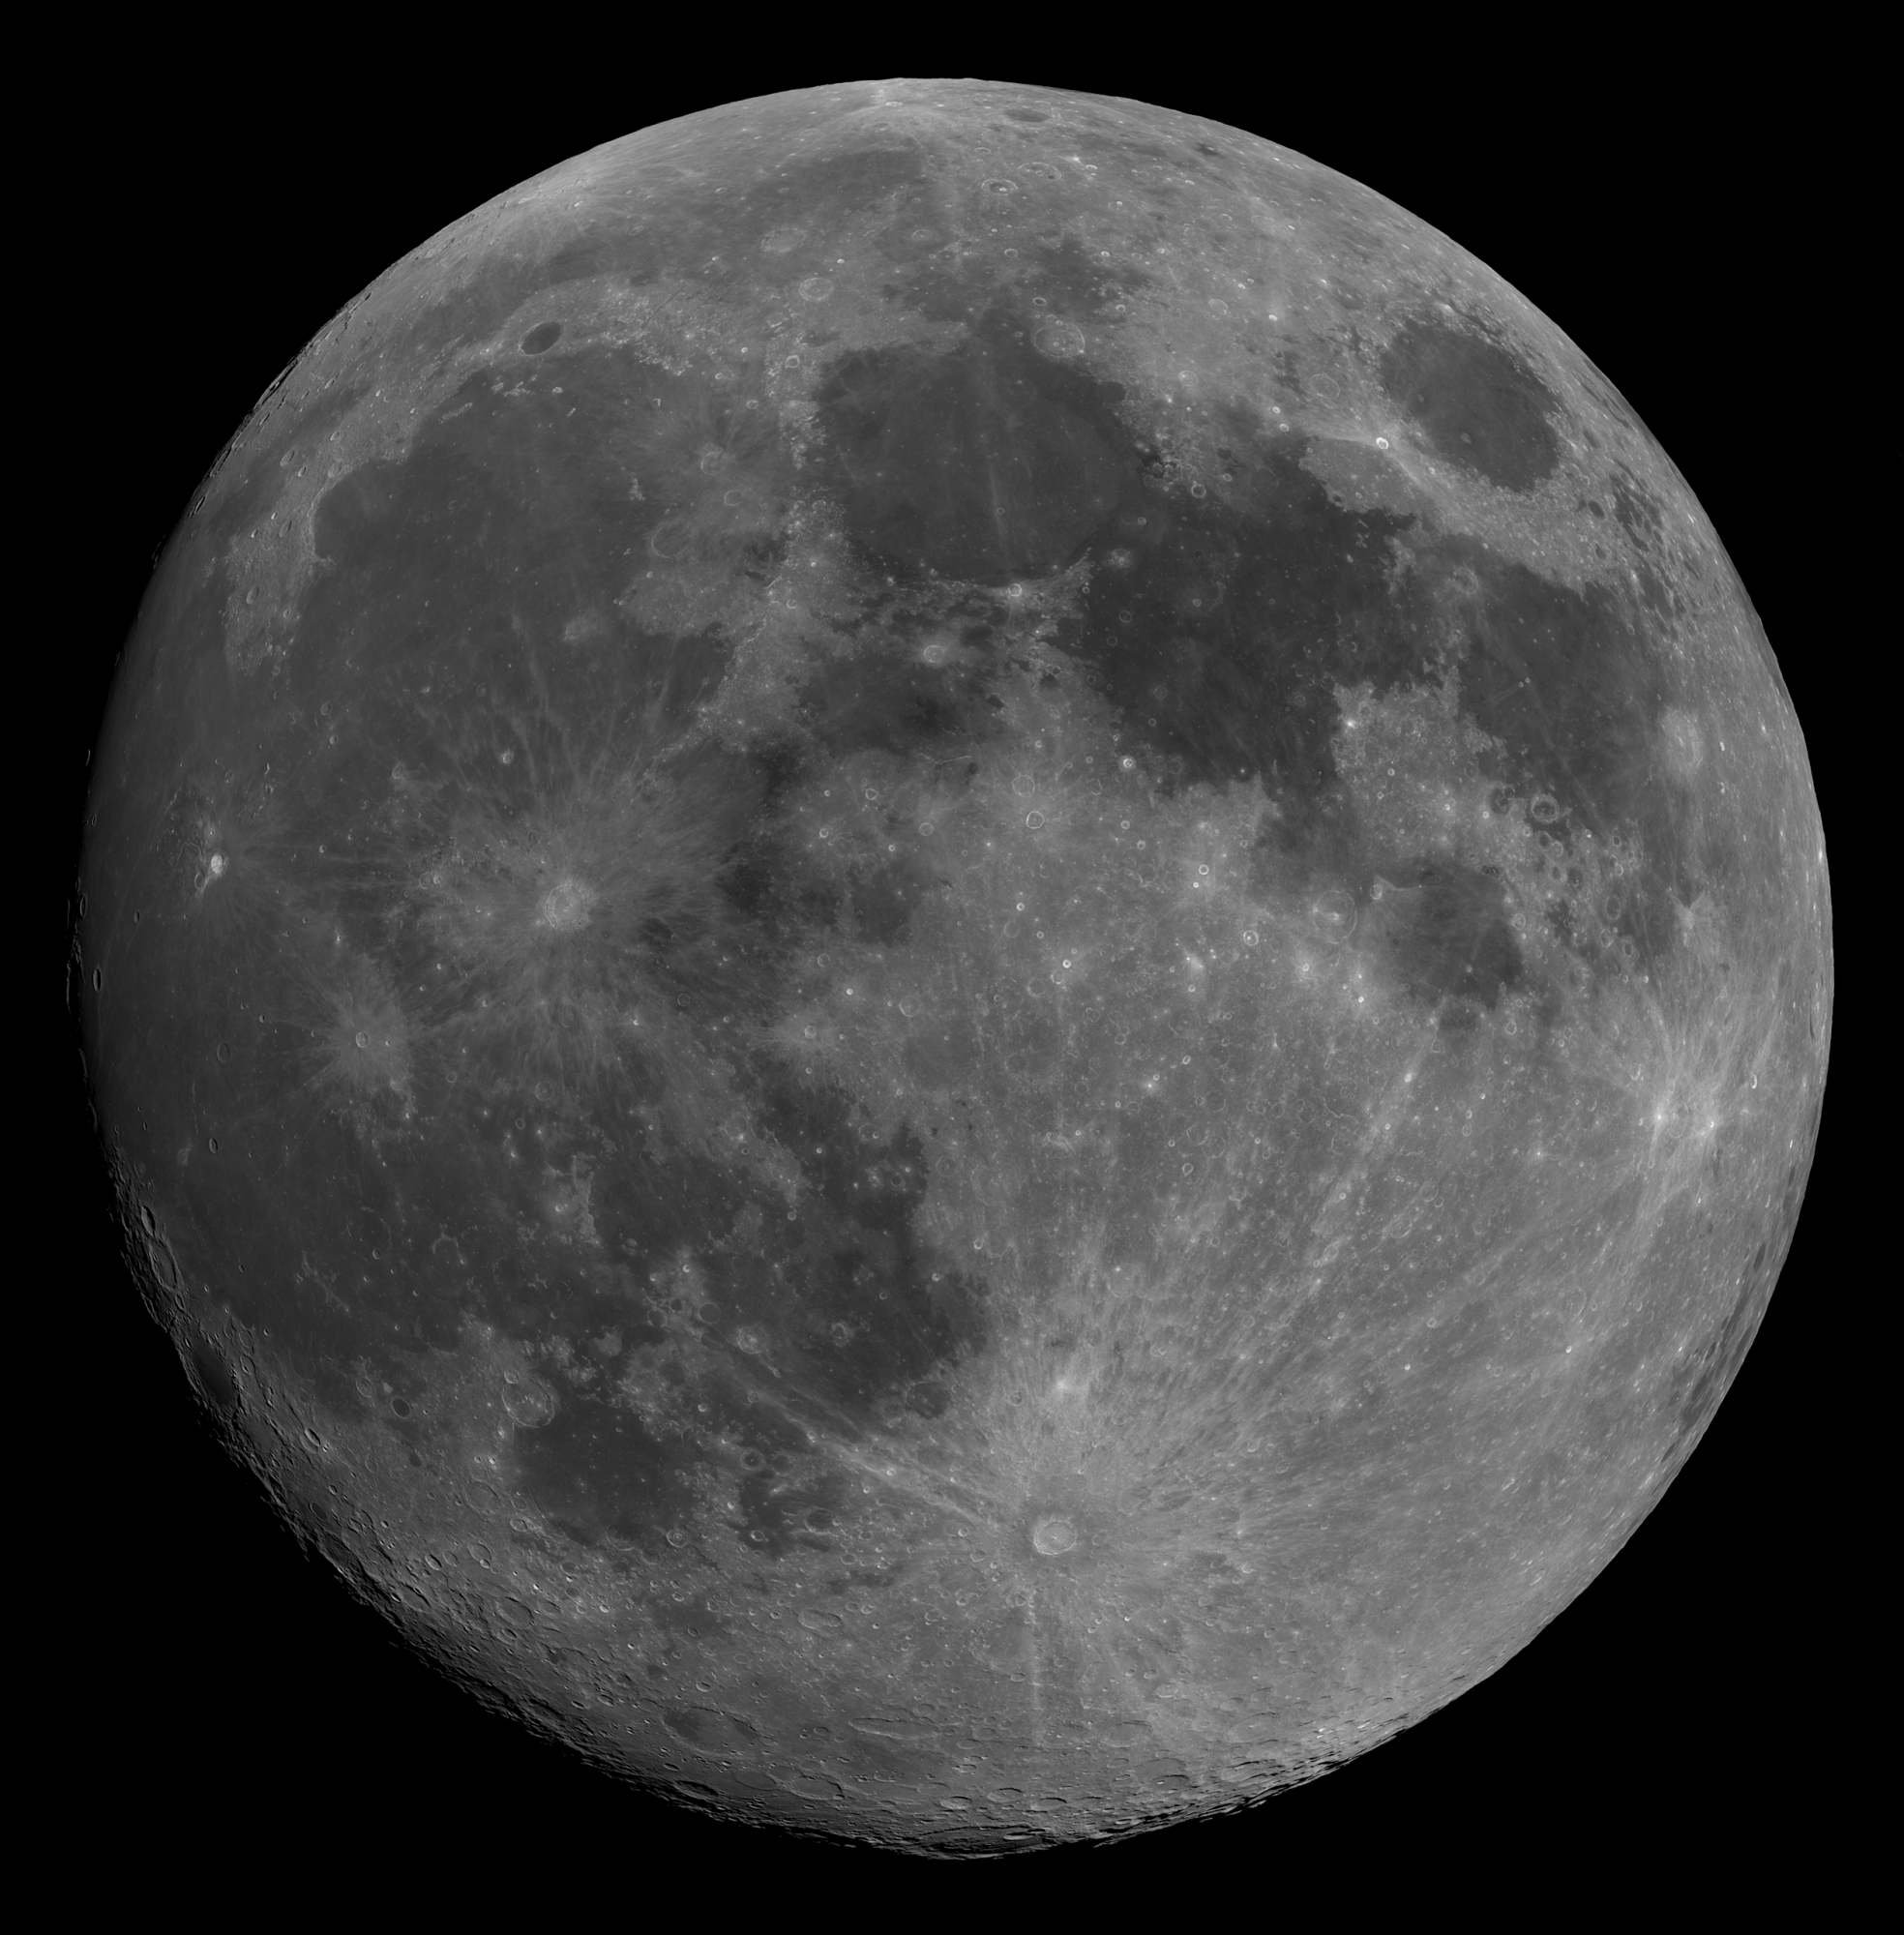 L_Lune_190319_100edter.thumb.PNG.c77b08cdc4a6db7bddbb8572a7f87f5f.PNG